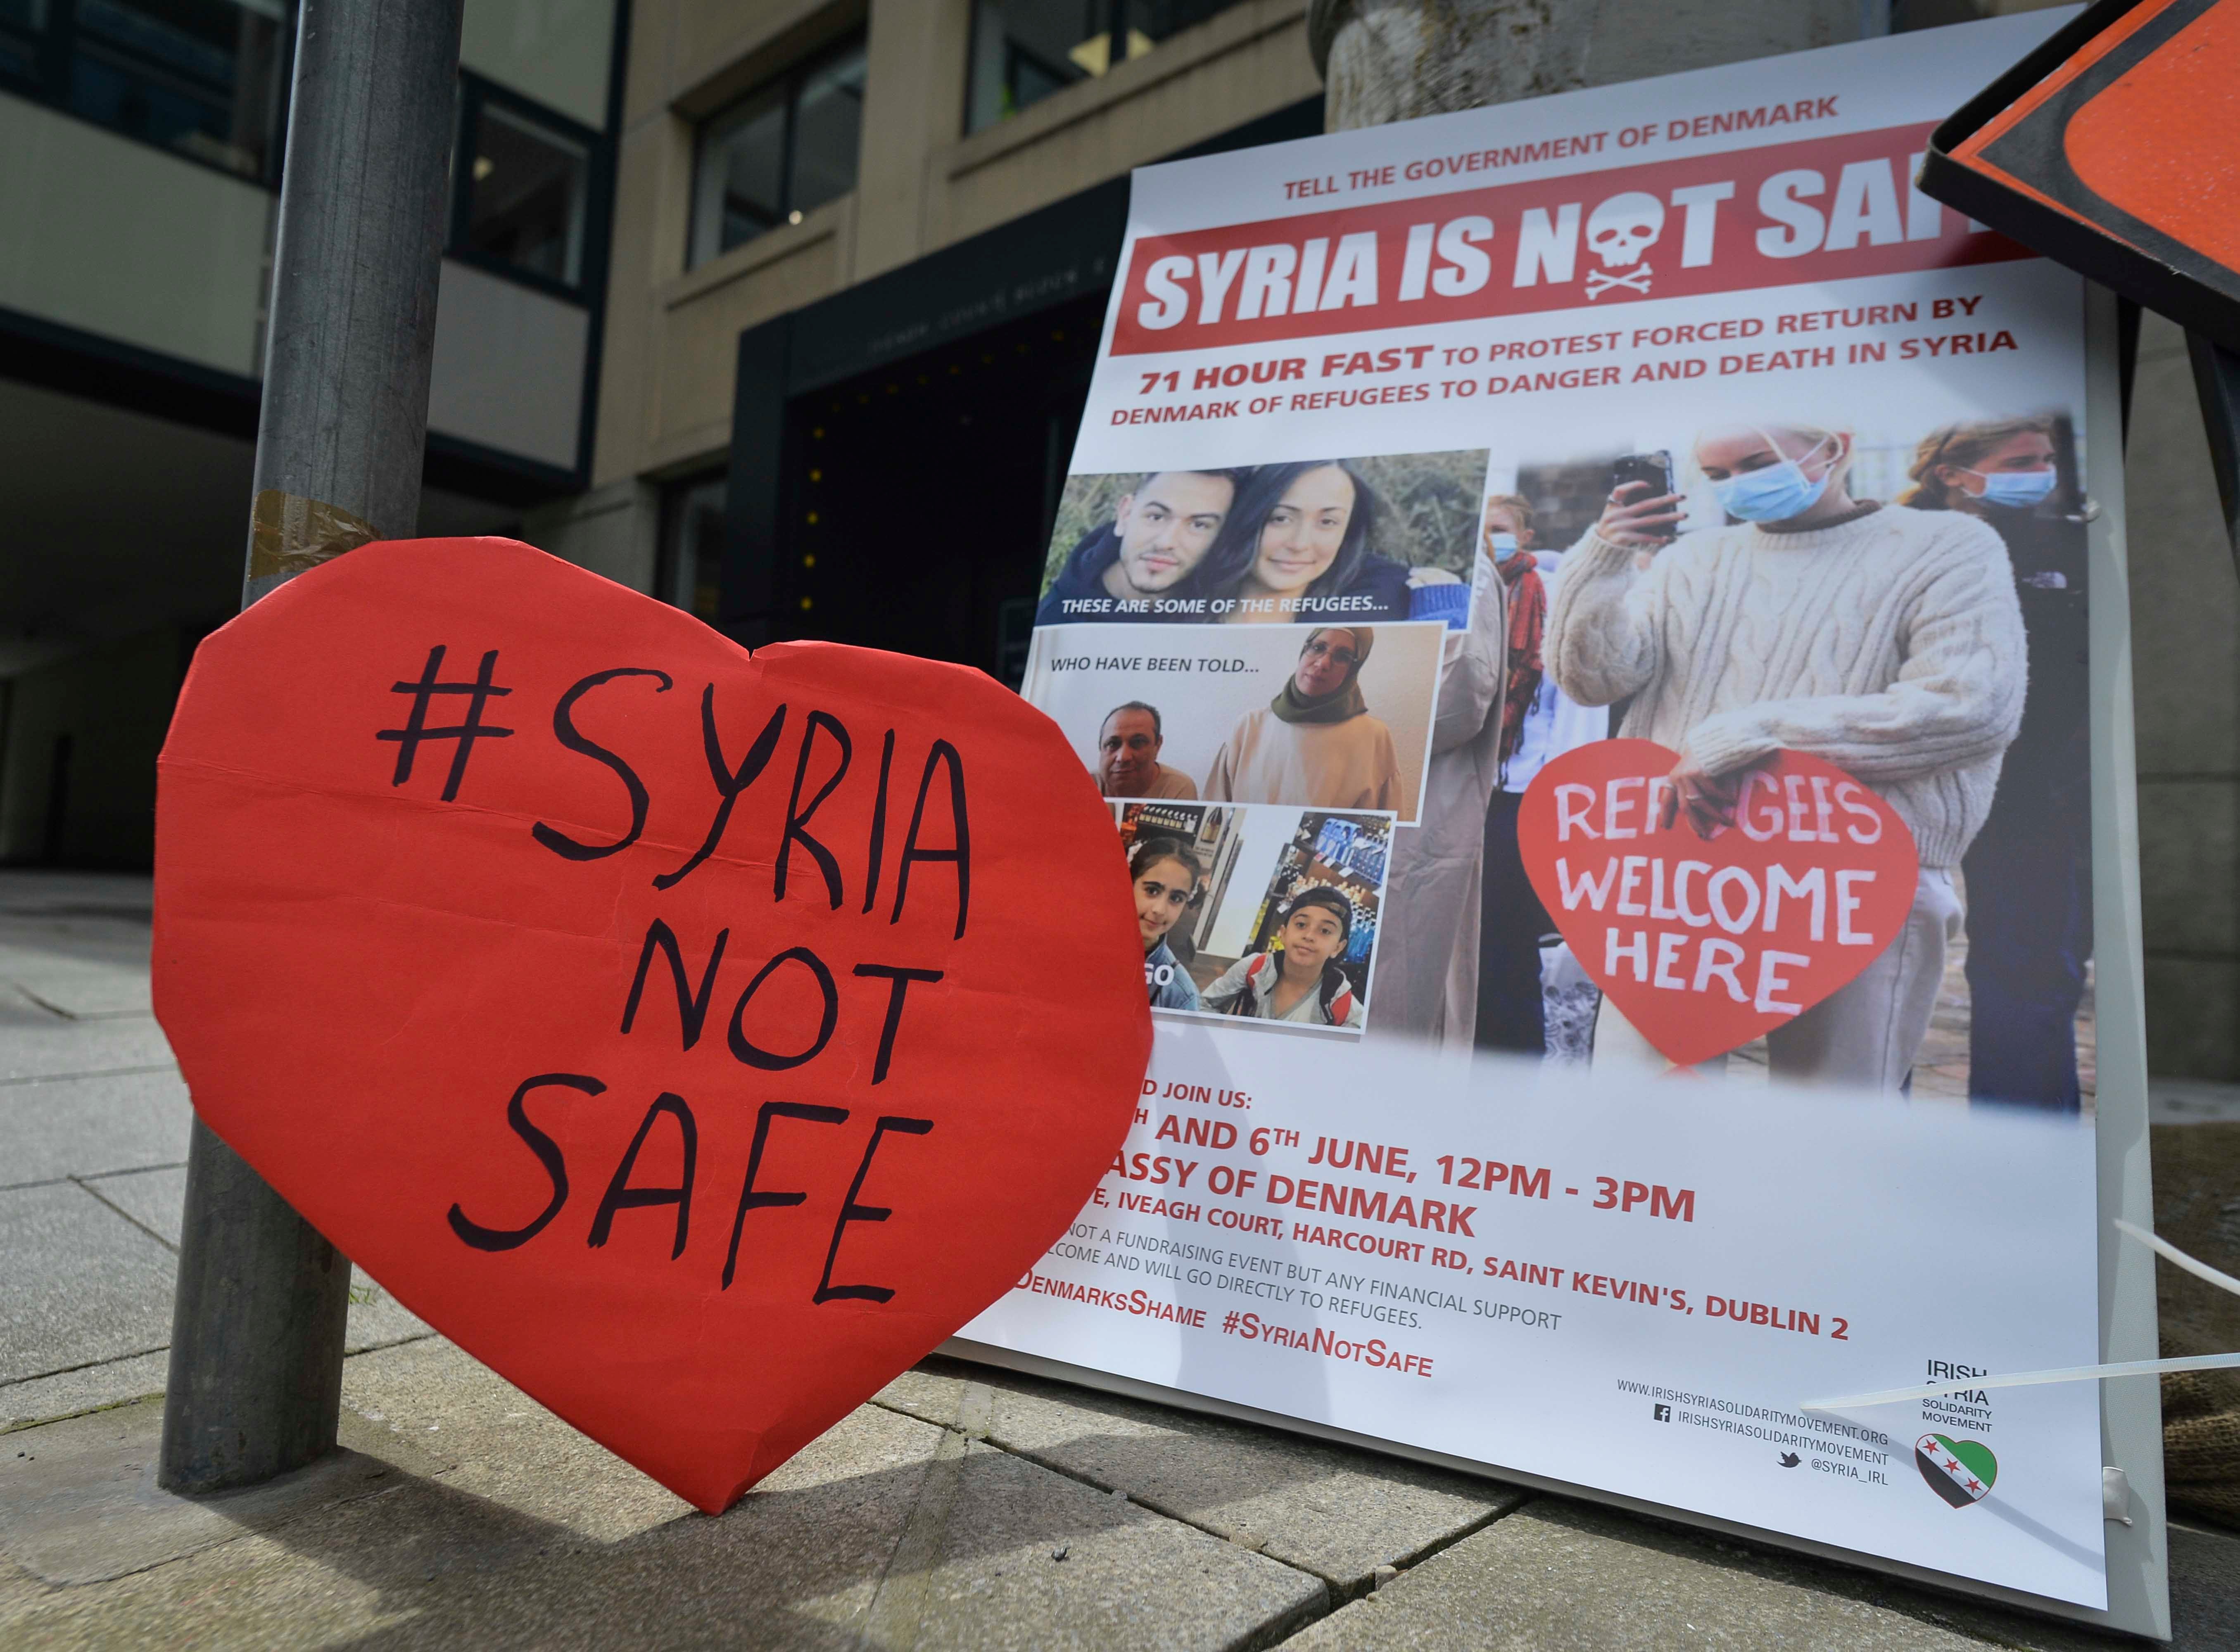 A protest sign that reads "#Syria Not Safe"